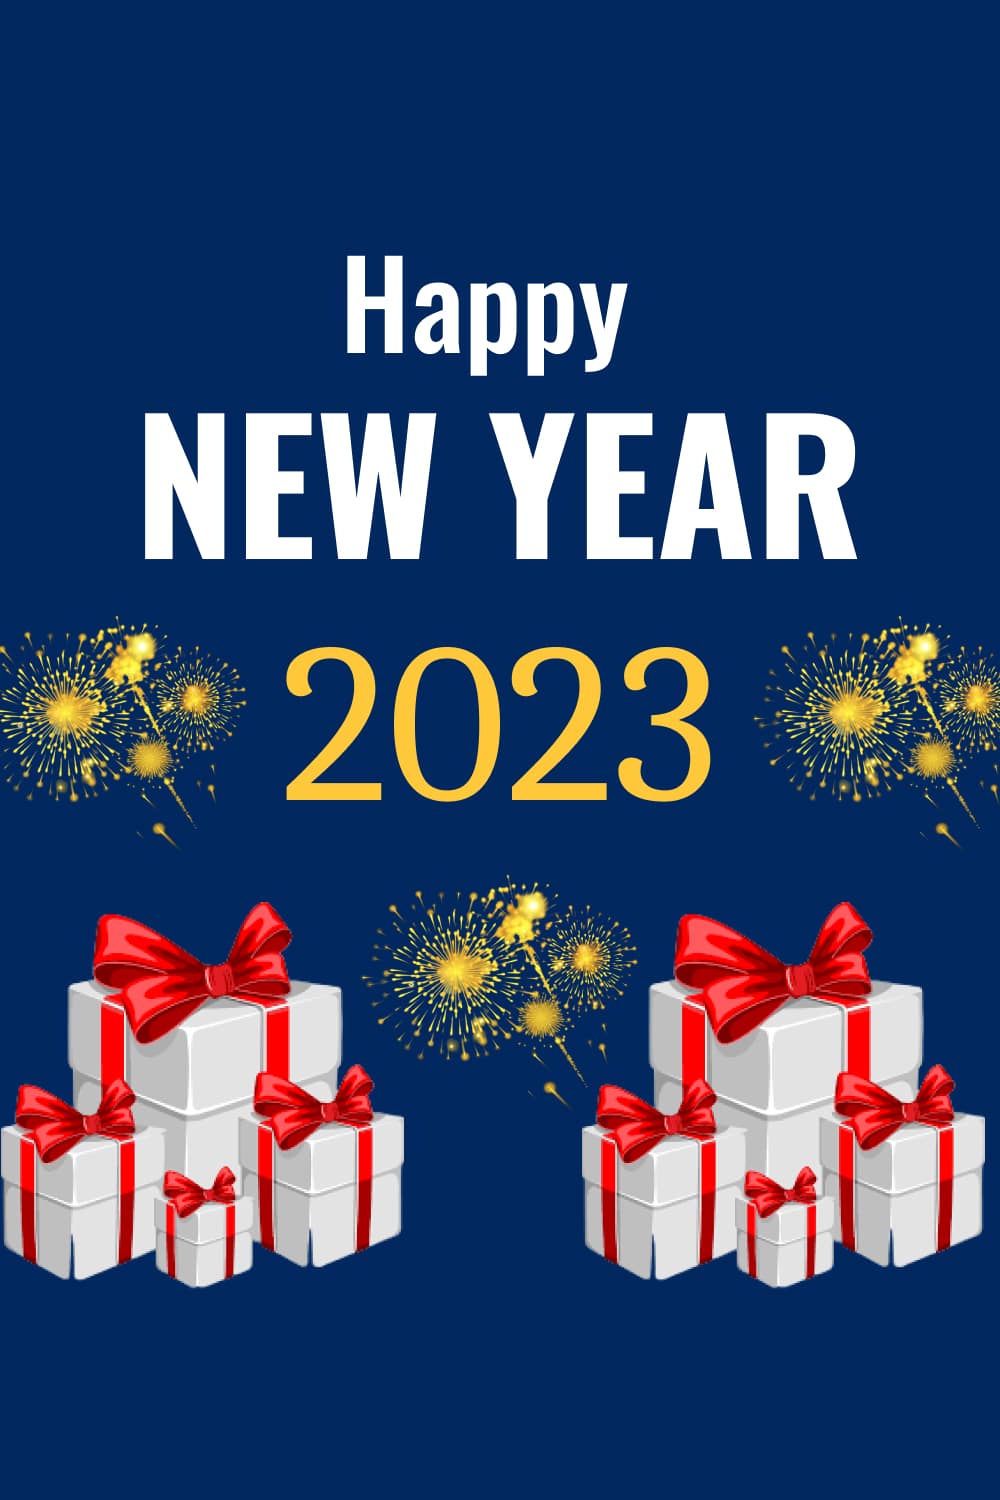 Happy New Year Social Media Post Template pinterest image.